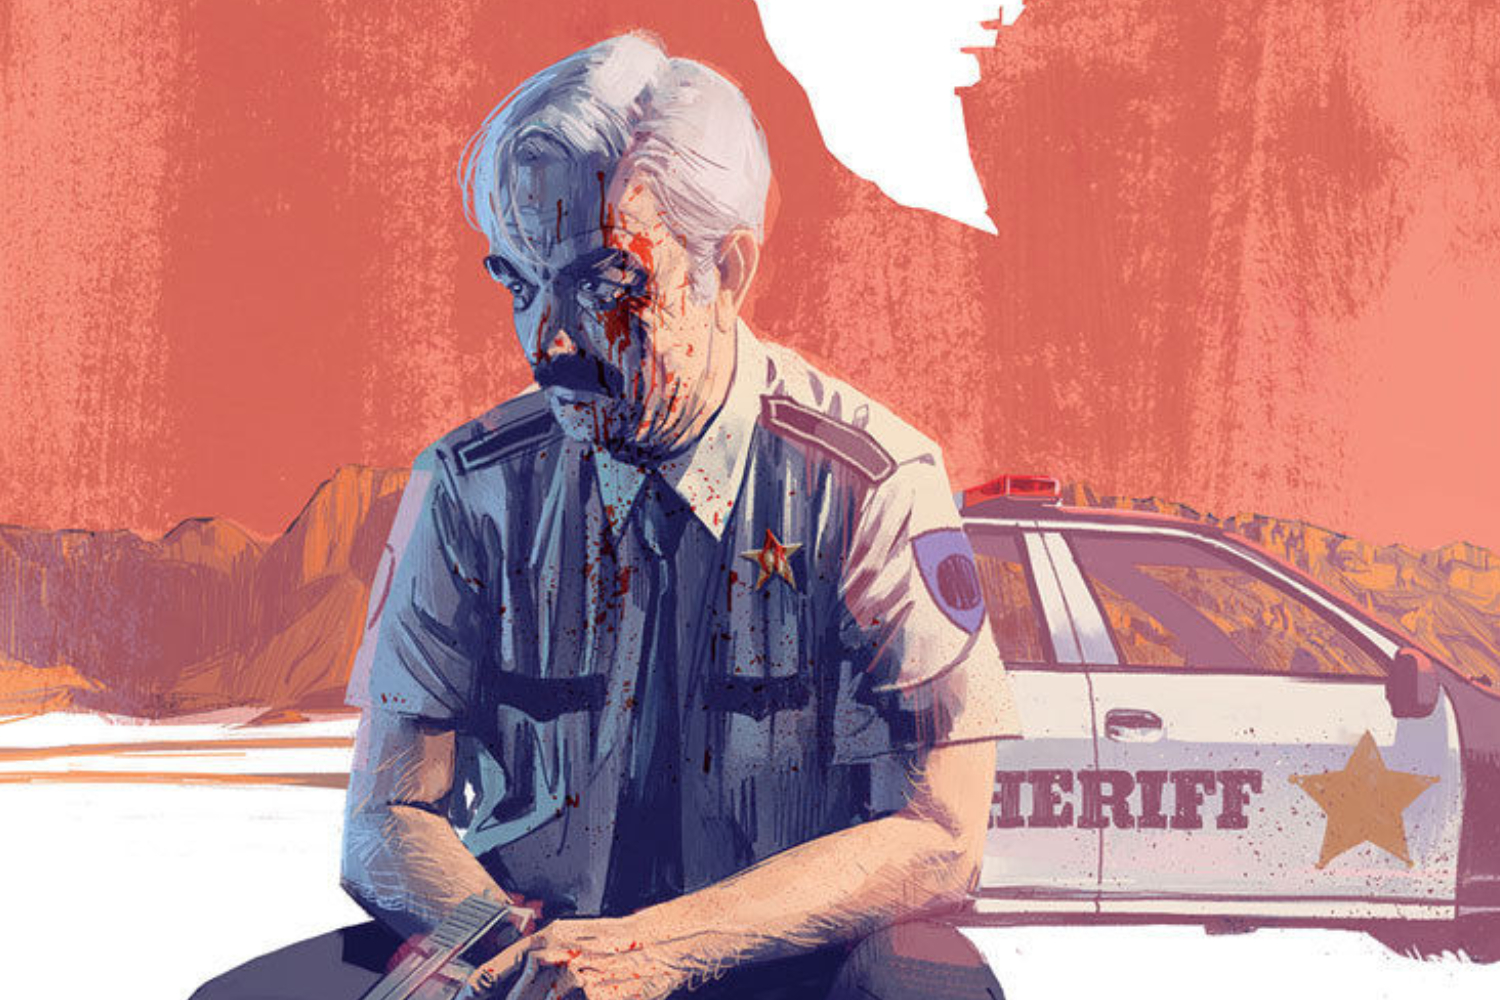 Chris Condon and Jacob Phillips talk blood, grit, and art in 'That Texas Blood'